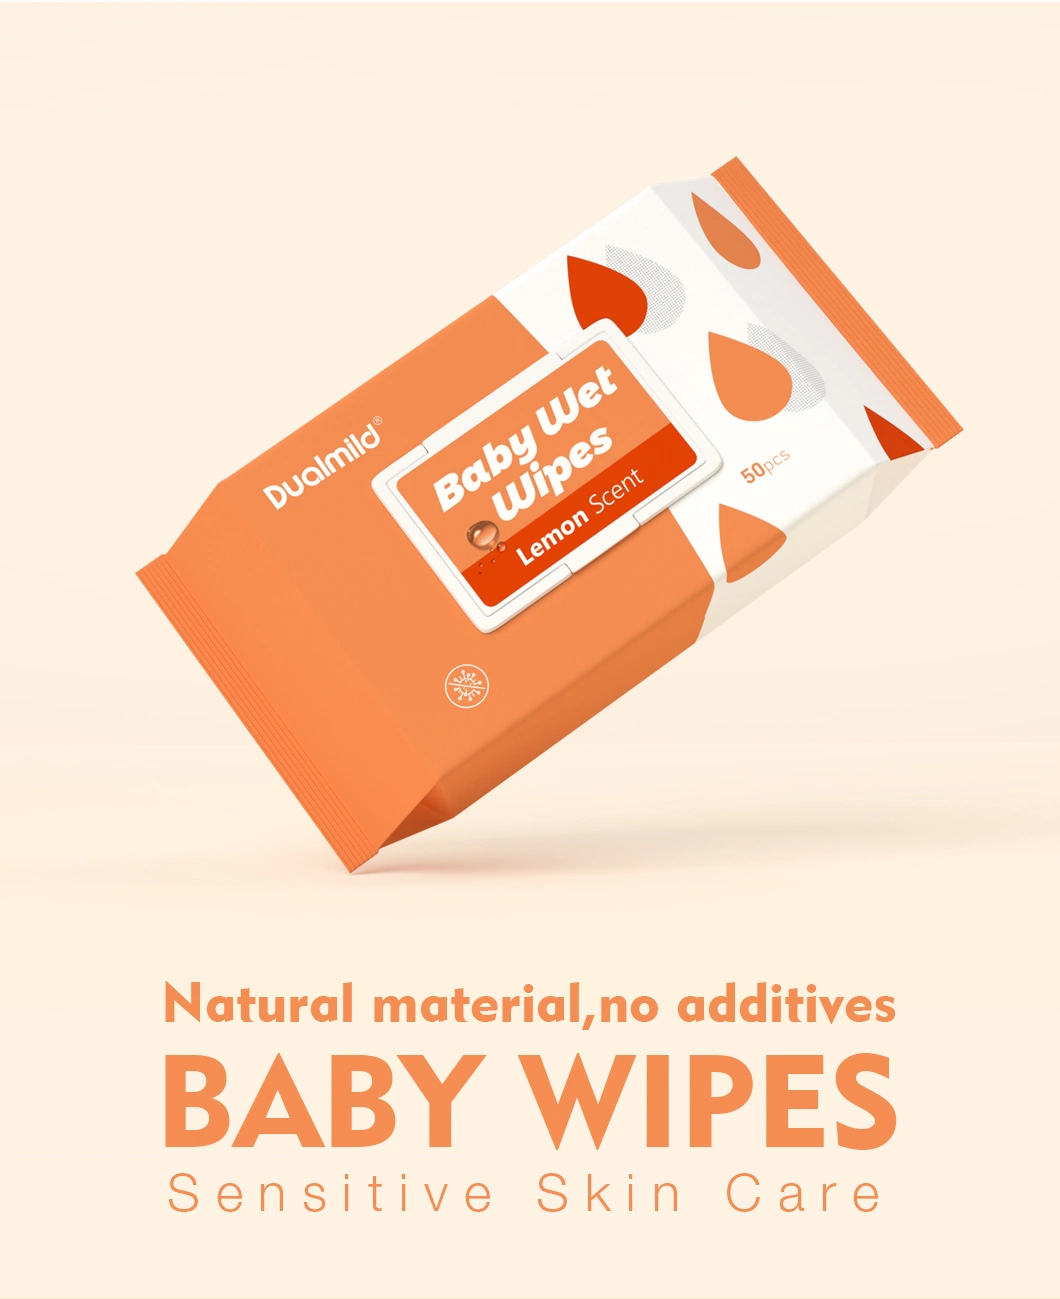 China Wholesale Customized Household Feature Toilet Paper Single/Disposable Hand Biodegradable Water Cleaning Safety Tissue Wet Wipes for Baby with Alcohol/Smal